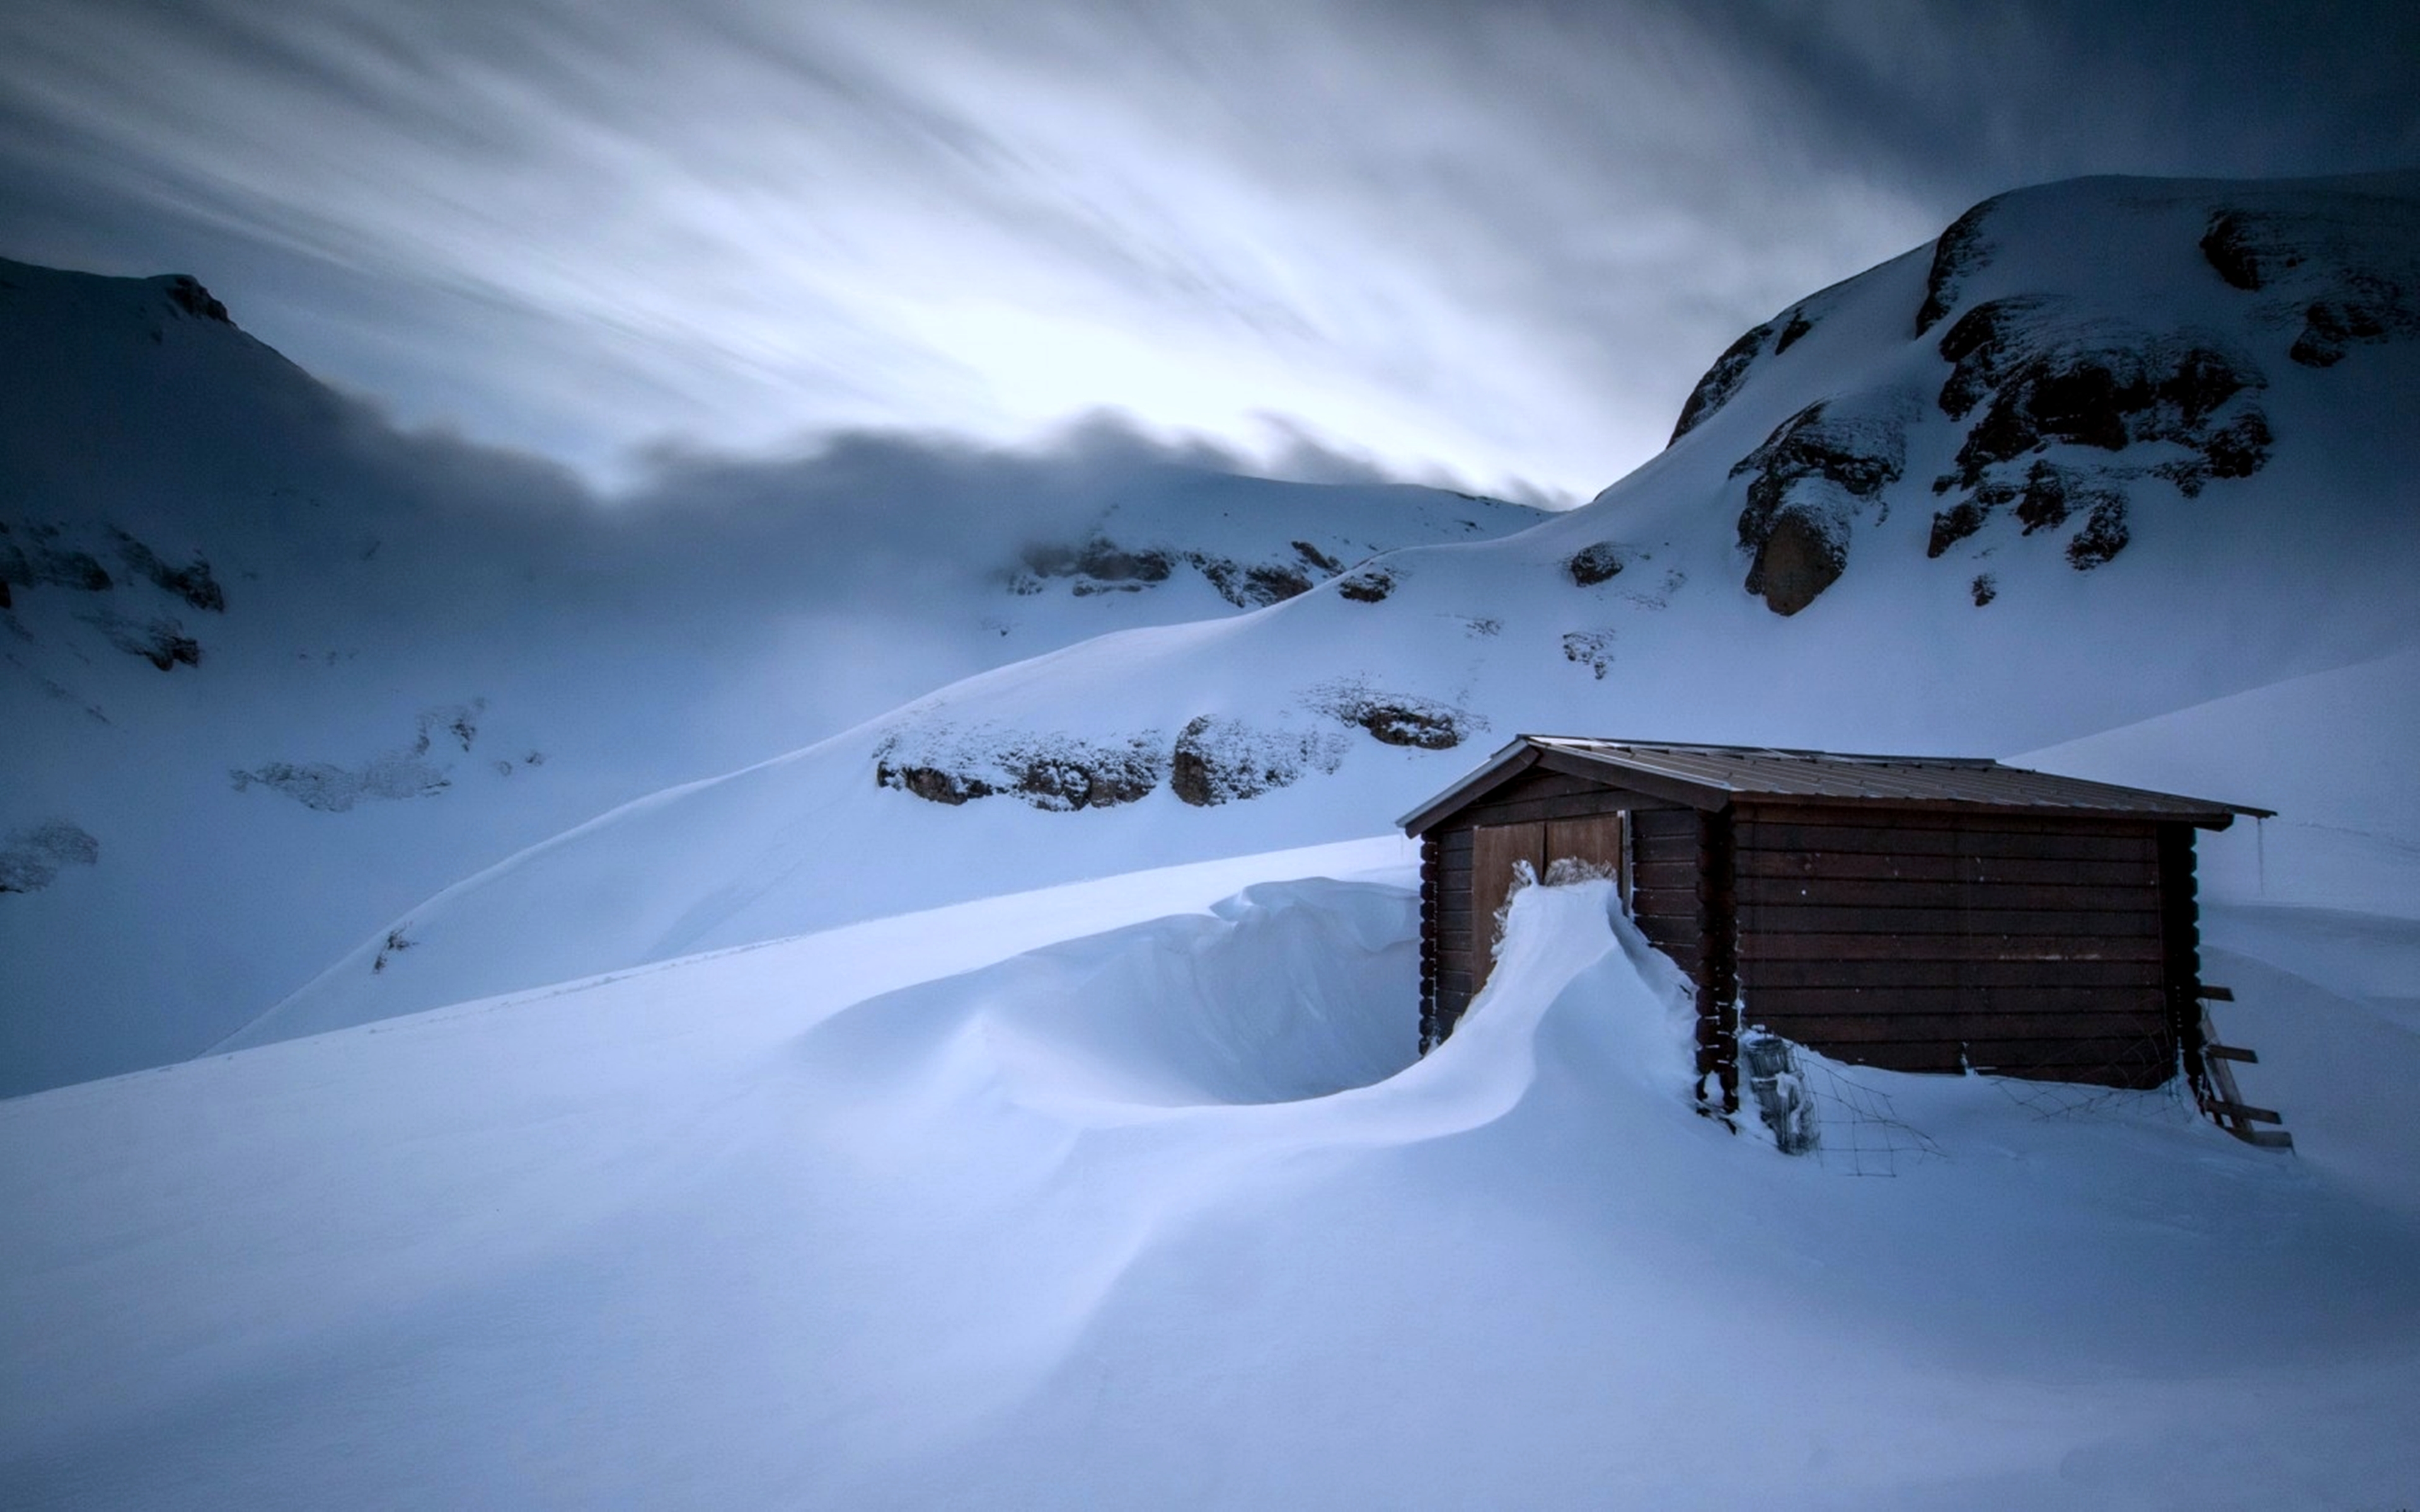 photography, winter, cold, house, hut, landscape, mountain, nature, snow, white